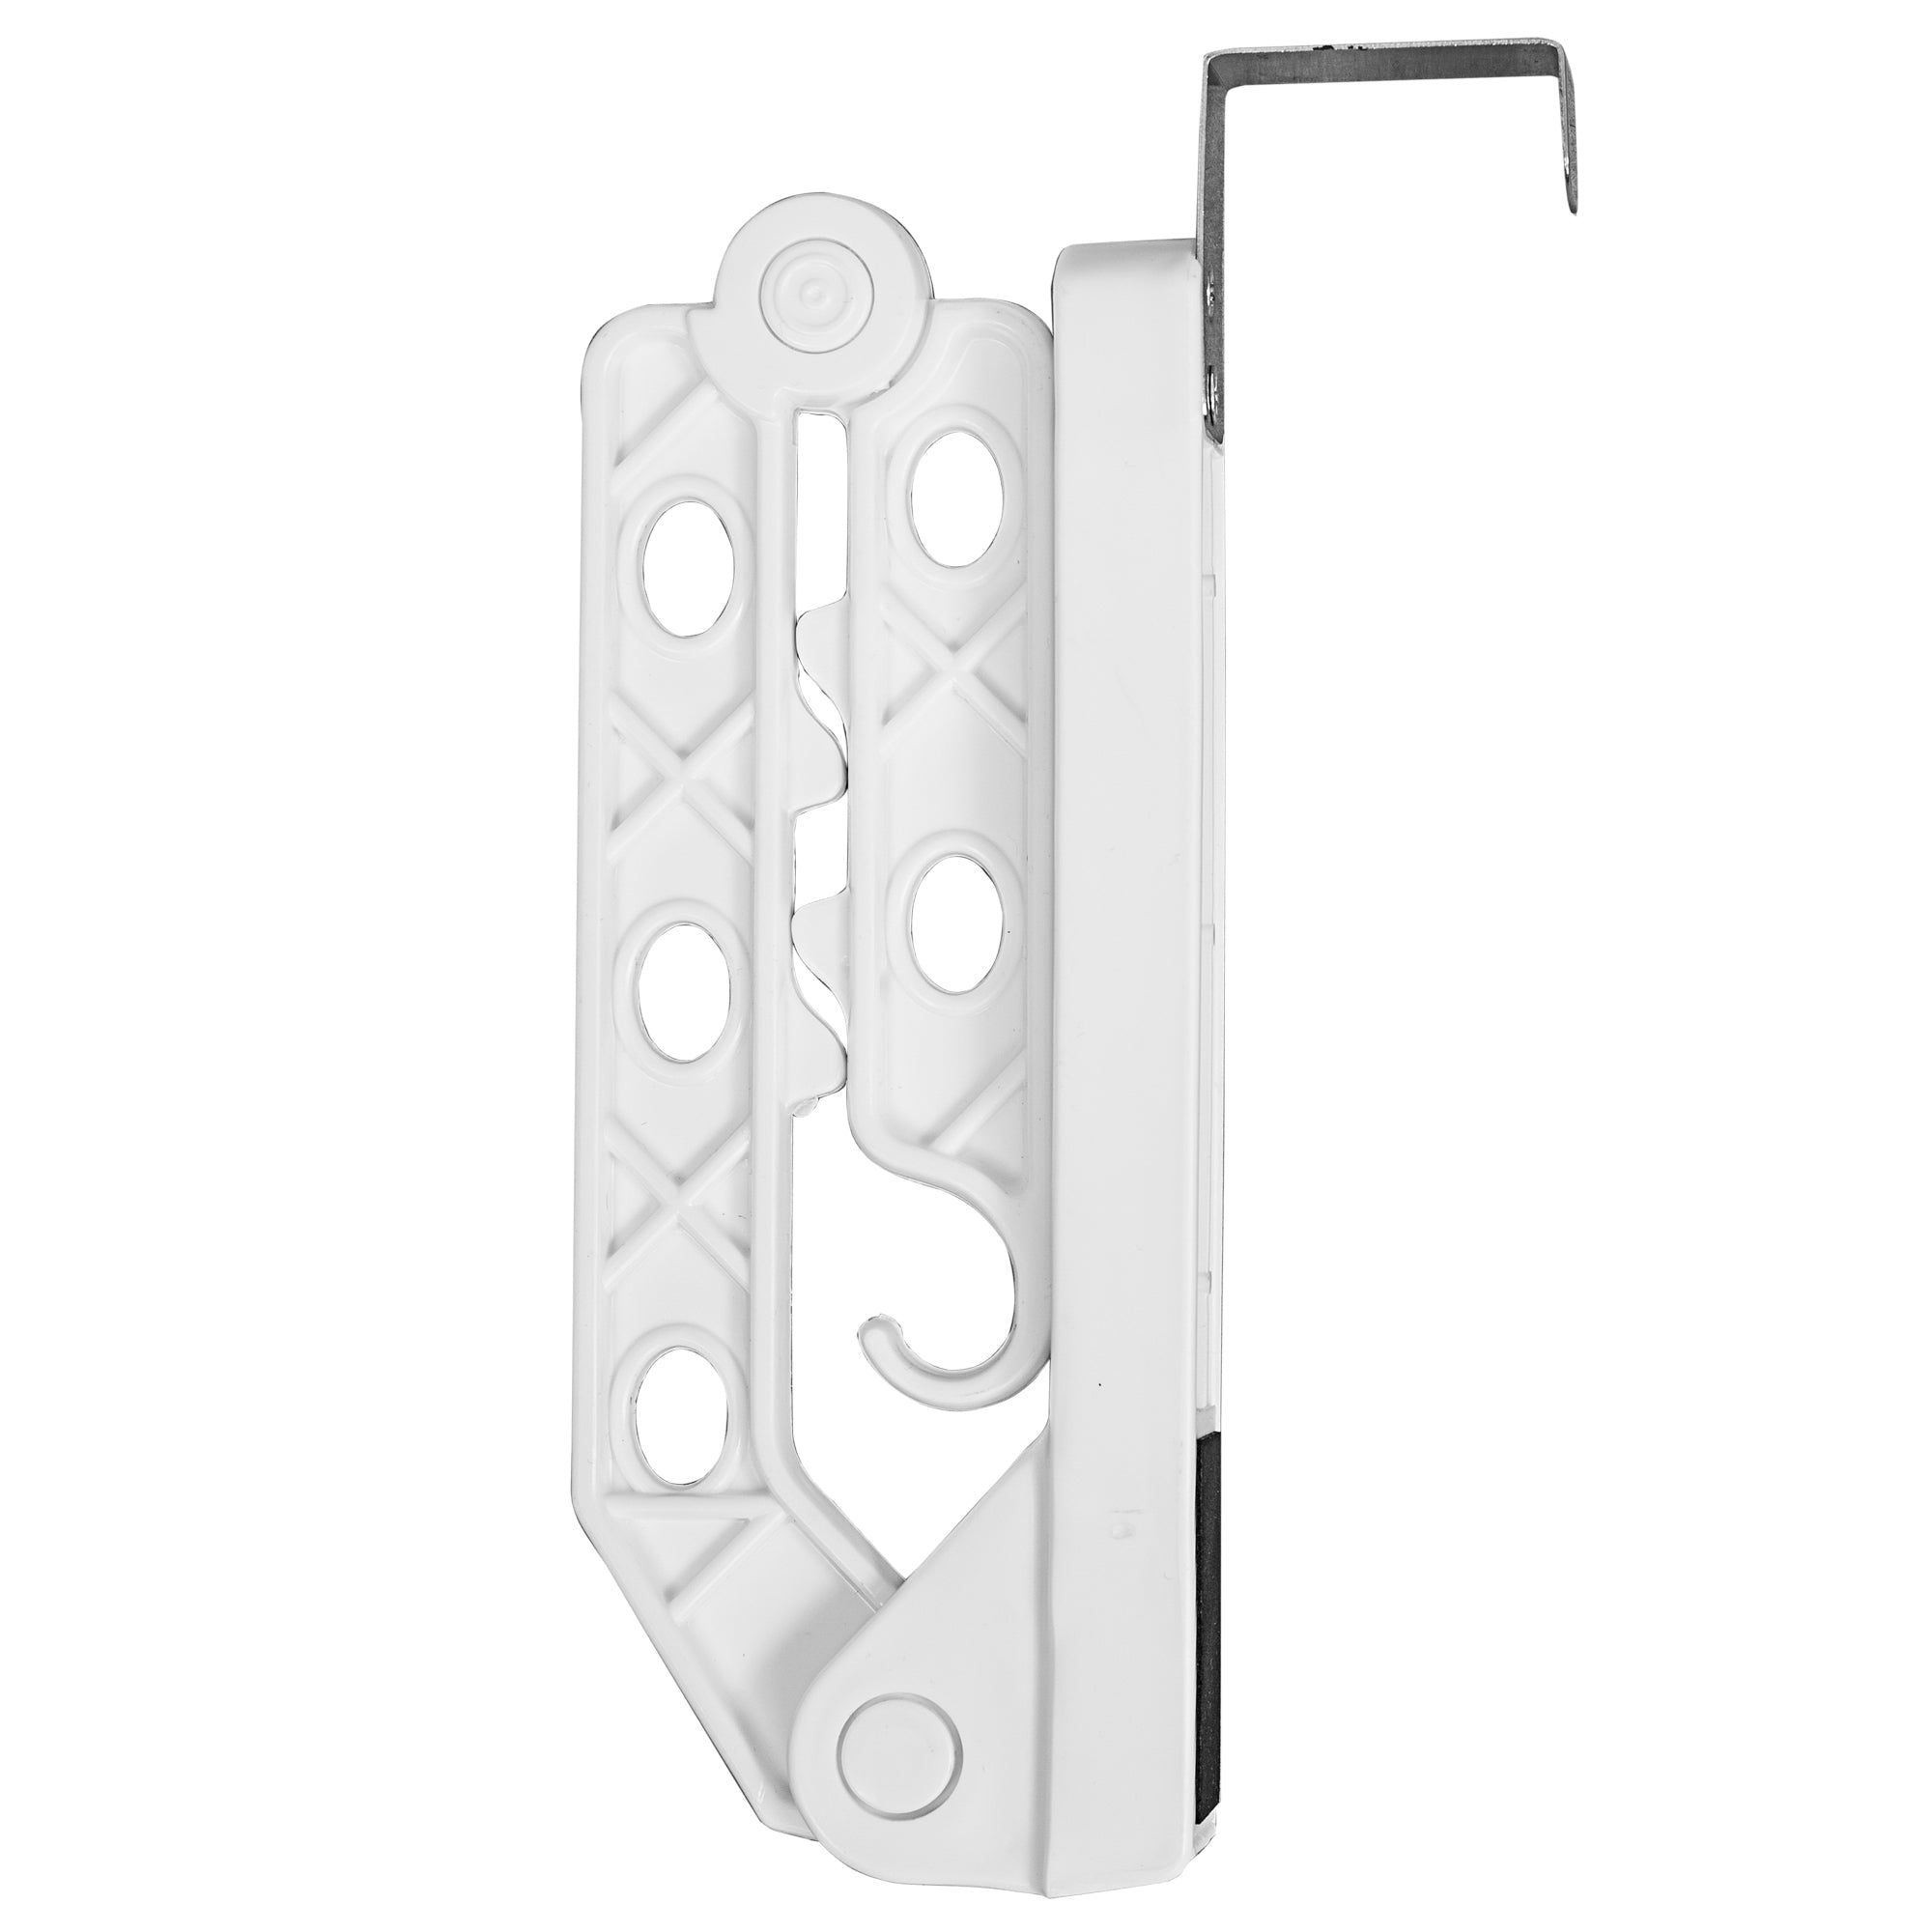 Over-The-Door Hanger Hooks with Expandable Arm - Smart Design® 6